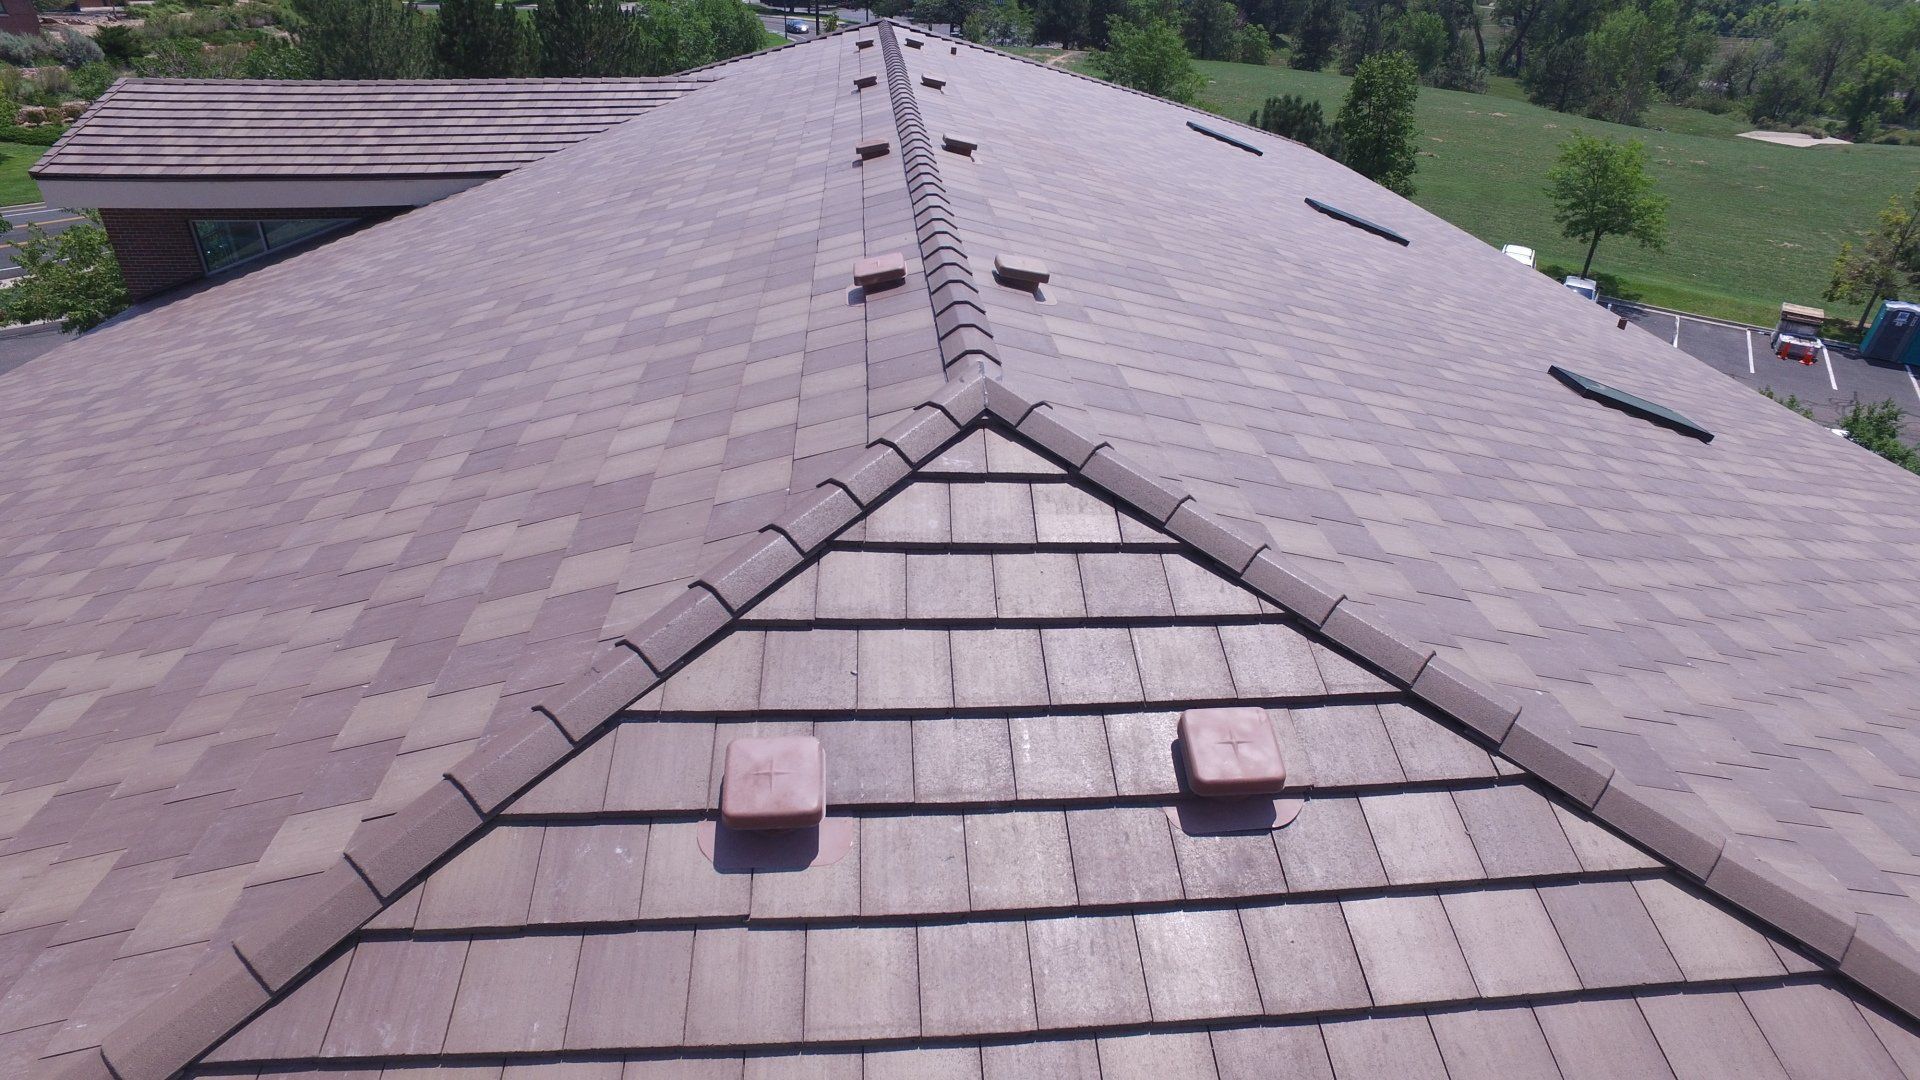 A freshly installed roof by Heritage Roofing & Contracting (close-up).